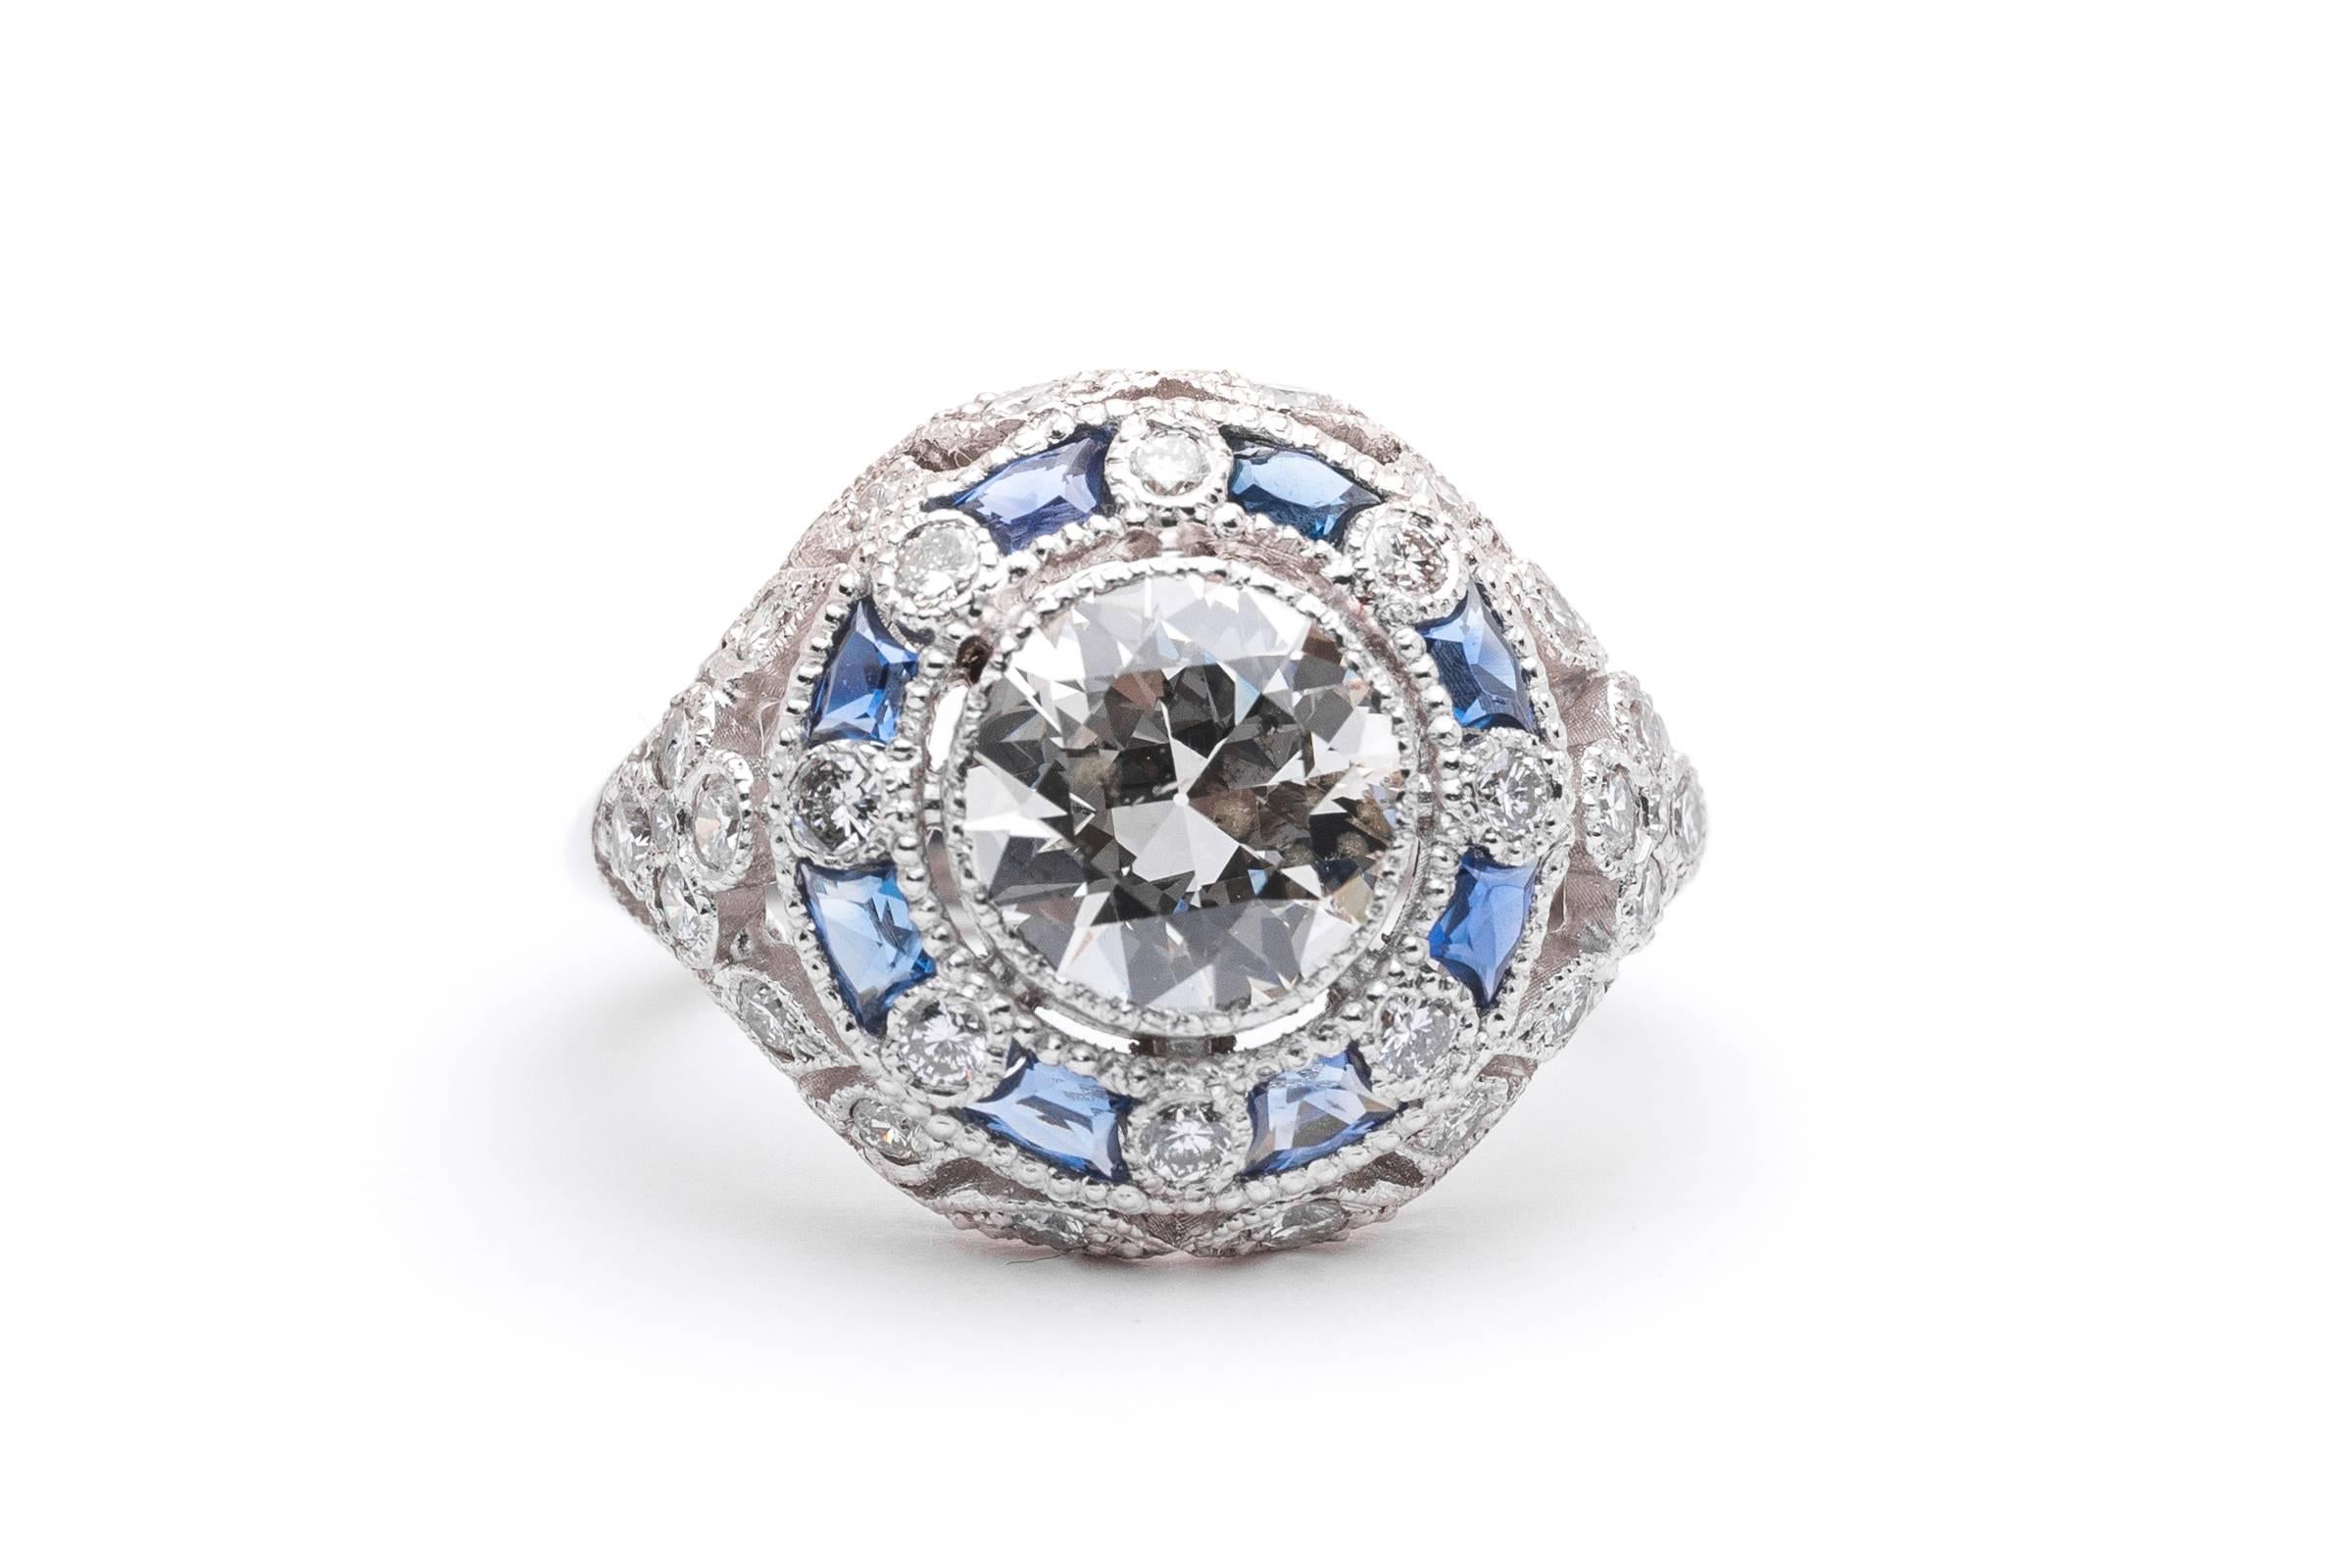 Beacon Hill Jewelers Presents:

A truly enchanting Edwardian style floral motif 3.12 carat diamond, and sapphire engagement ring in platinum. Centering this stunning ring is a substantial EGL certified 1.60 carat antique European cut diamond